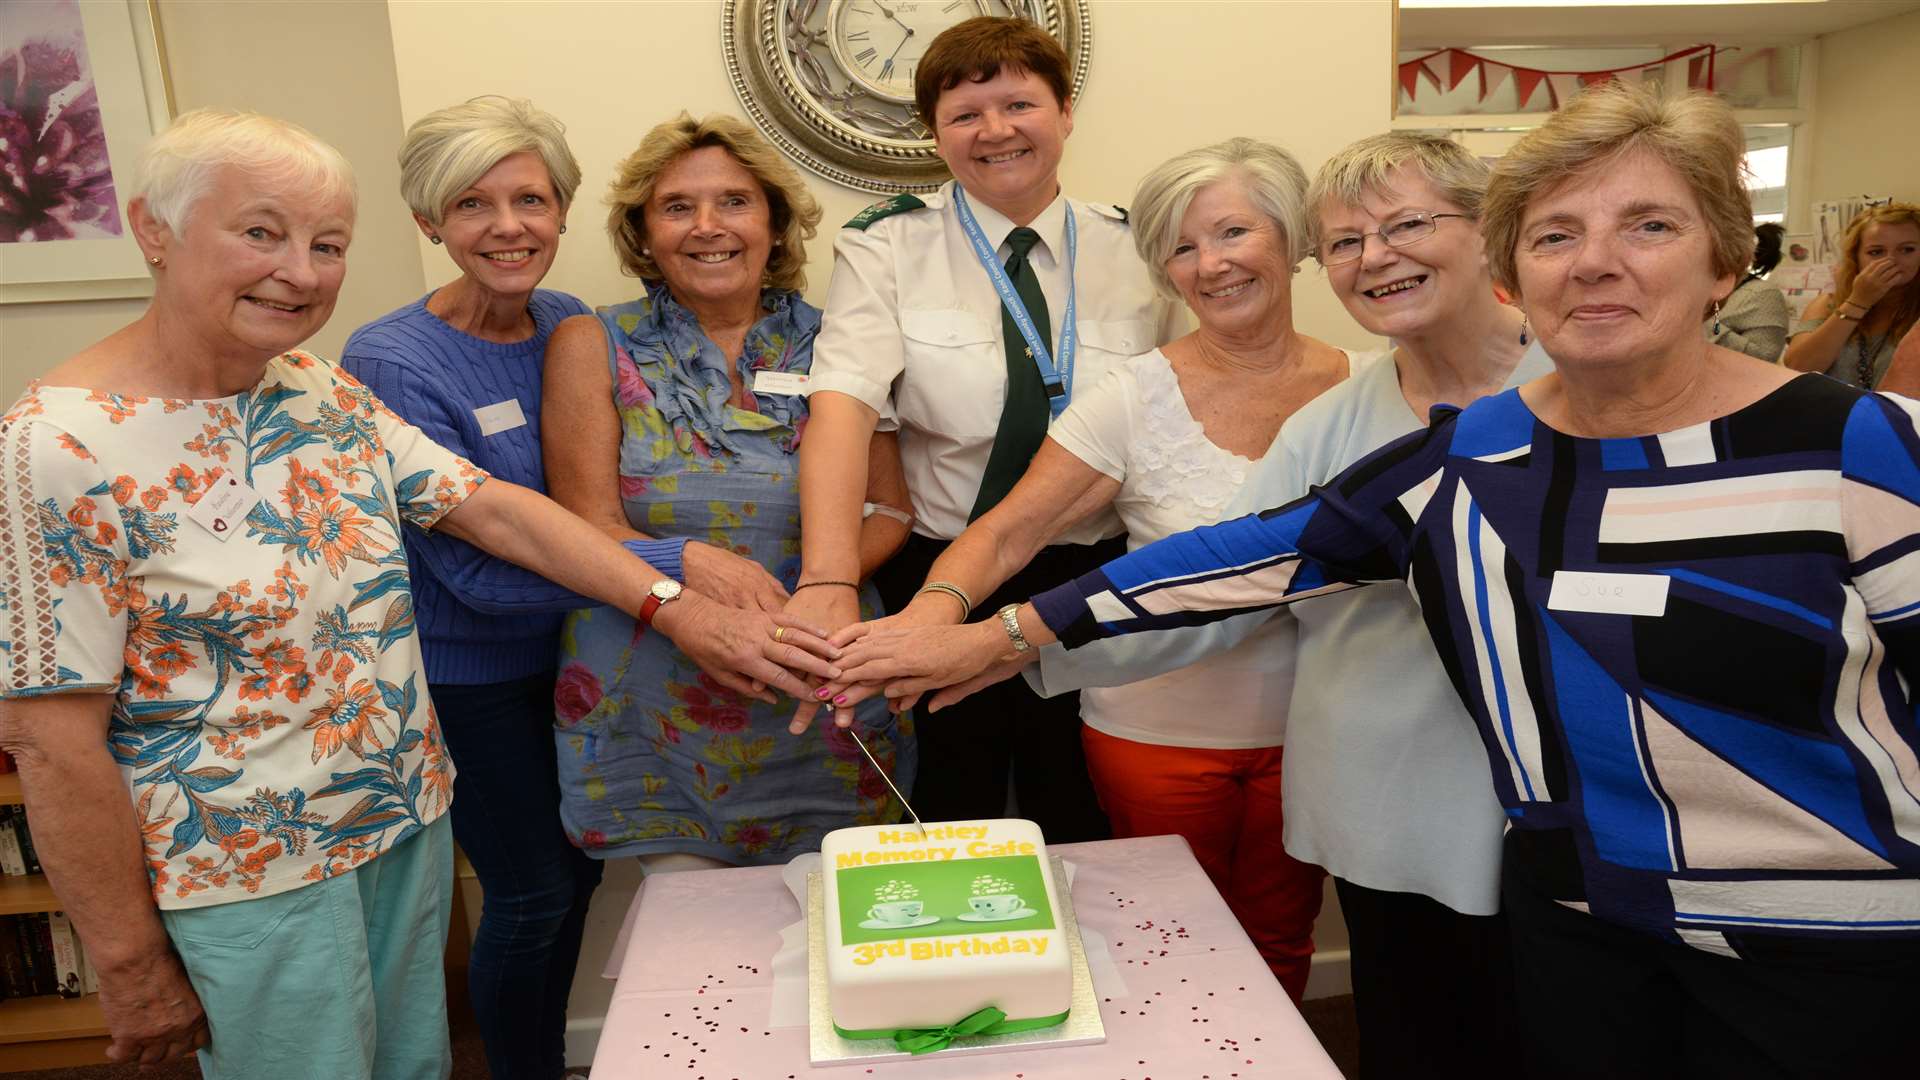 Volunteers Pauline Granger, Julie West, Veronica McGannon, Jackie West, Carole Farlow, Penny Spules and Sue Scott at the 3rd anniversary celebration of the Hartley Memory Cafe